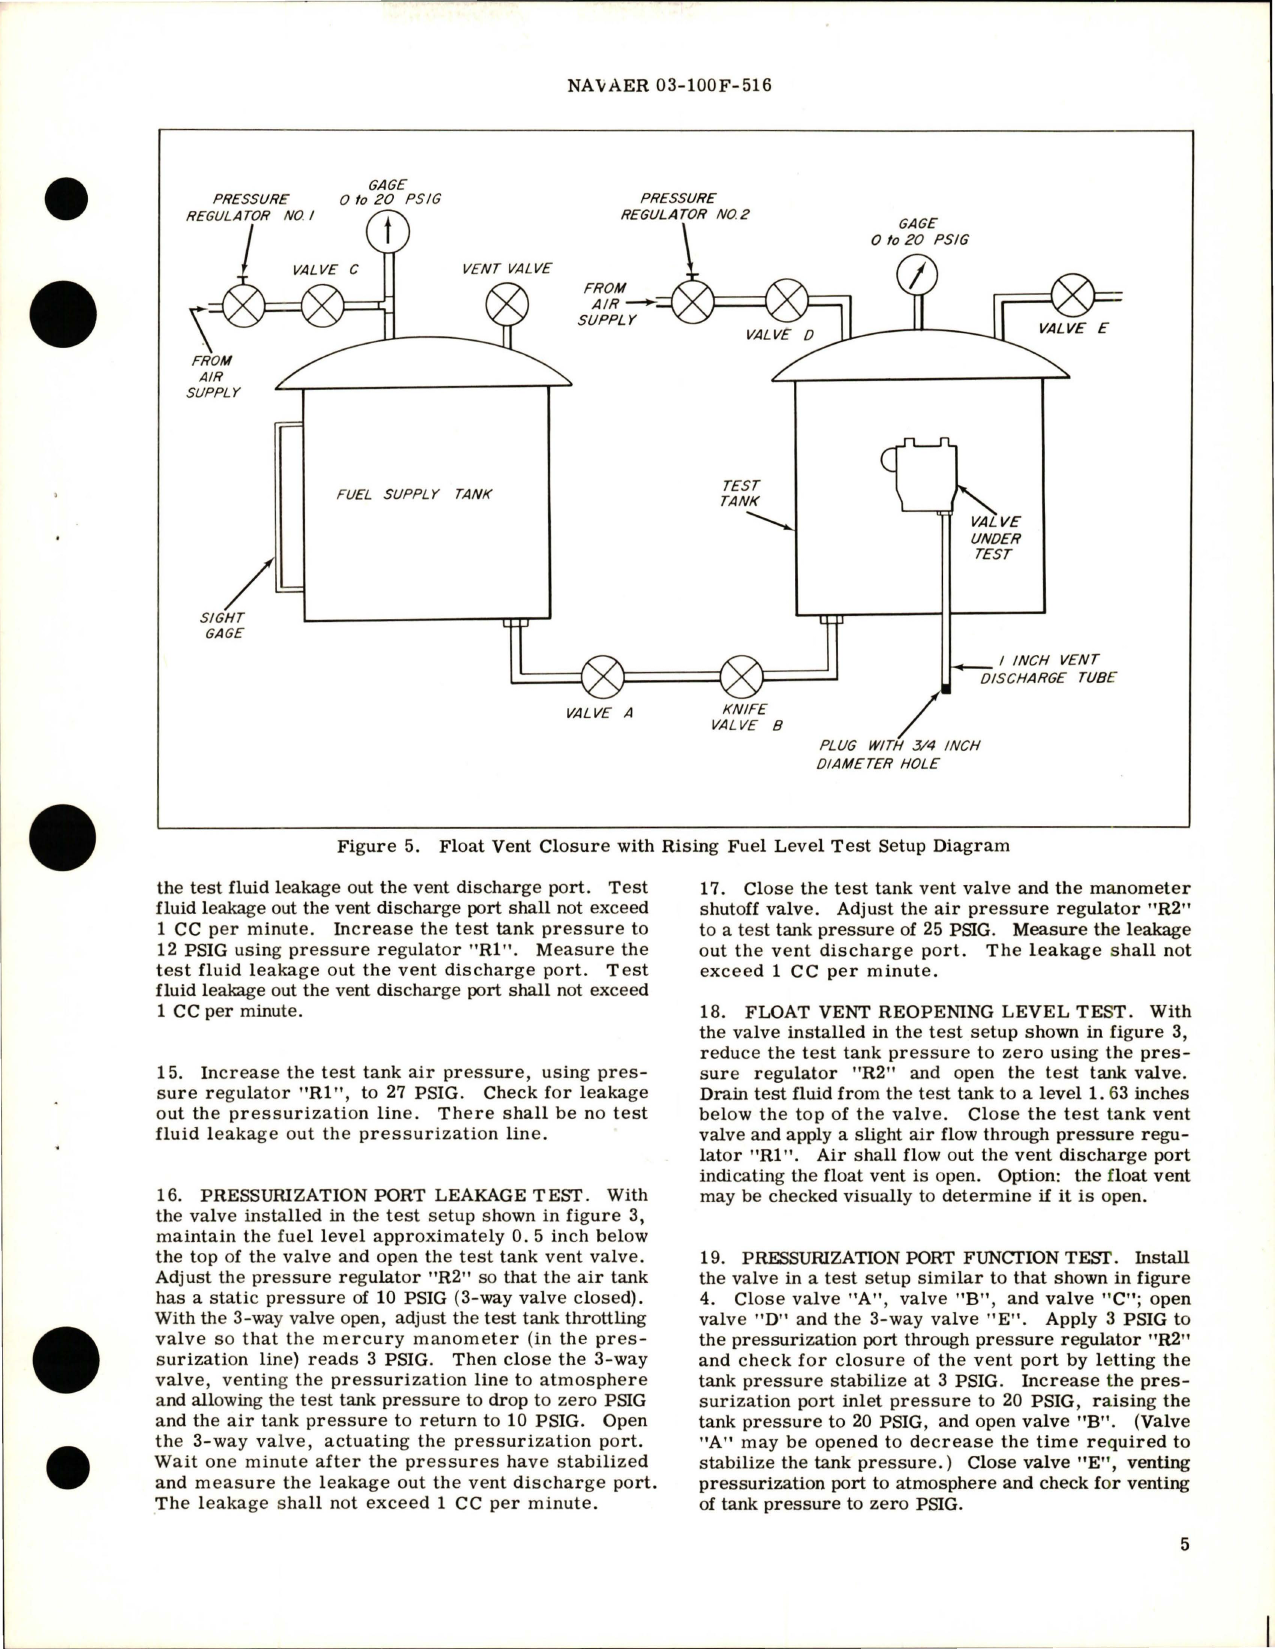 Sample page 5 from AirCorps Library document: Overhaul Instructions with Parts Breakdown for Float and Vent Pilot Valves - Parts 9-1254-51 and 9-1254-71